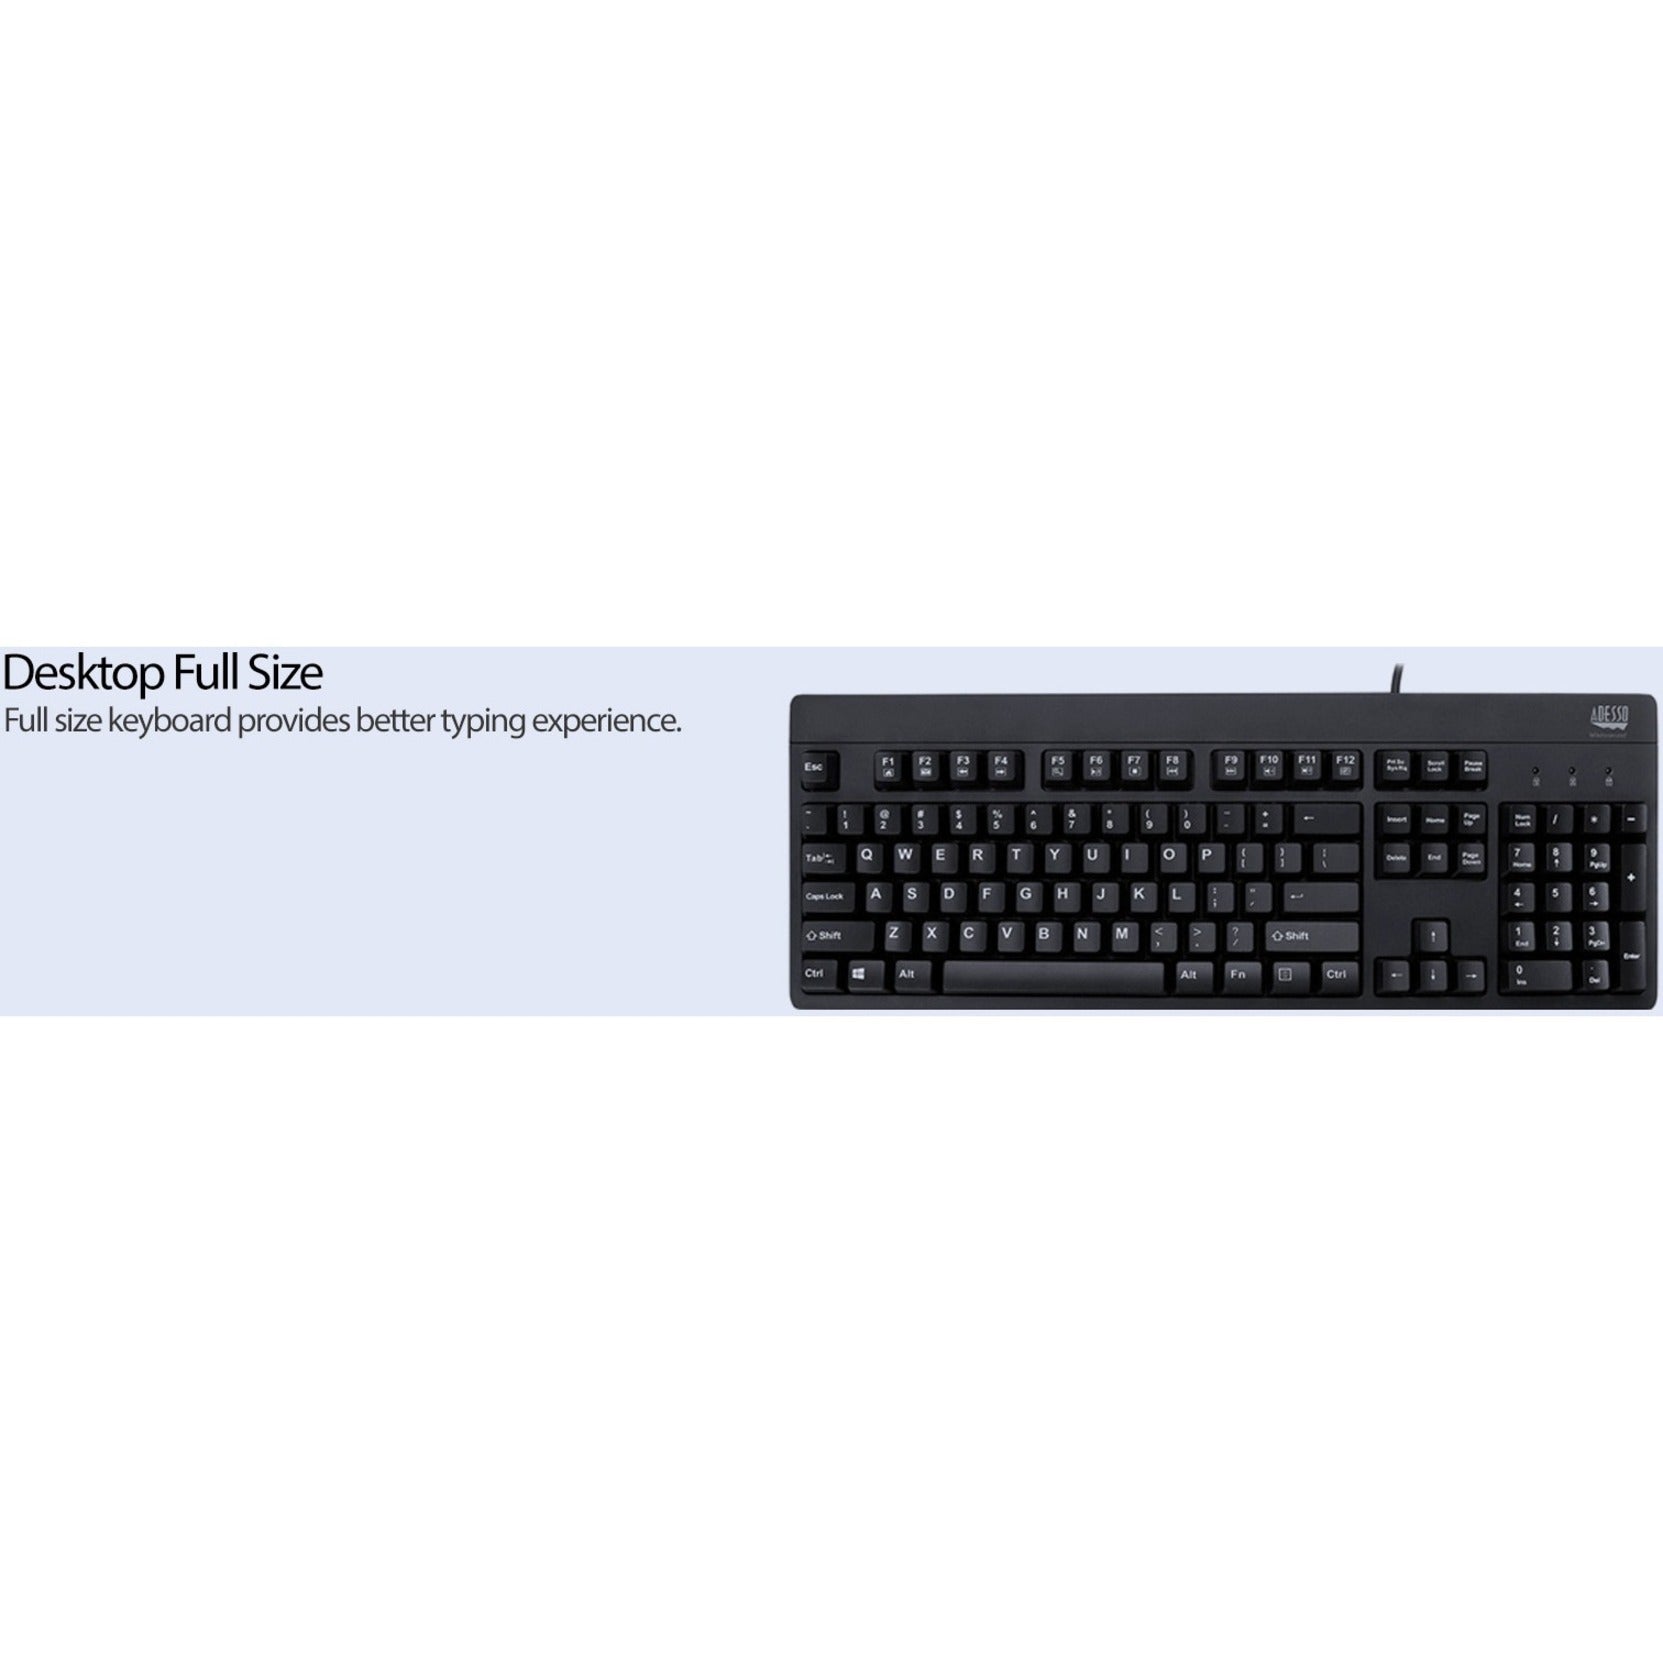 Adesso AKB-630UB EasyTouch 630UB Antimicrobial Waterproof Keyboard, Spill Proof, Full-size, Quiet Keys